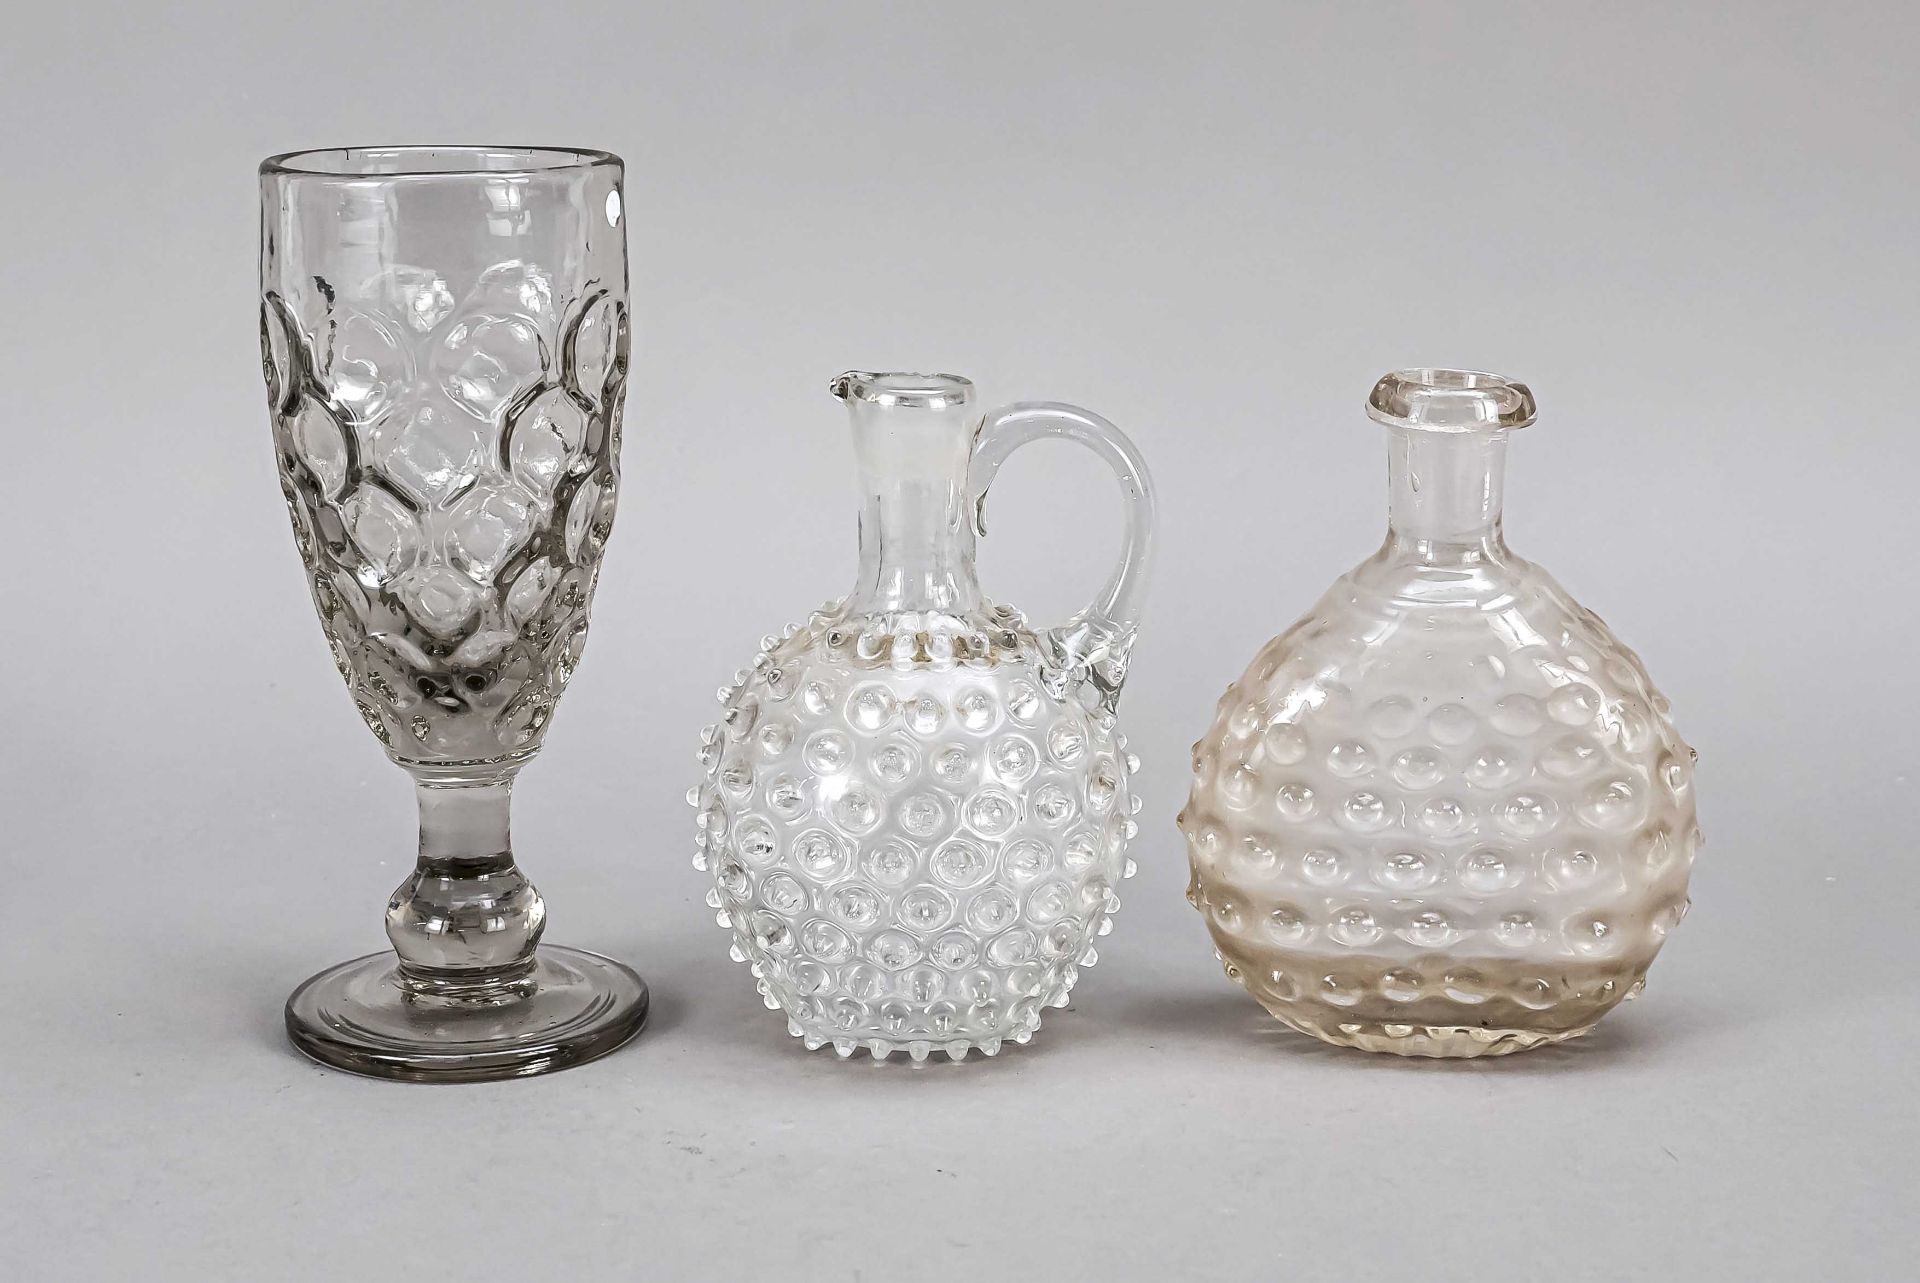 Group of three pieces, 19th century, 2 flacons and a foot glass, each clear glass, with break-off,